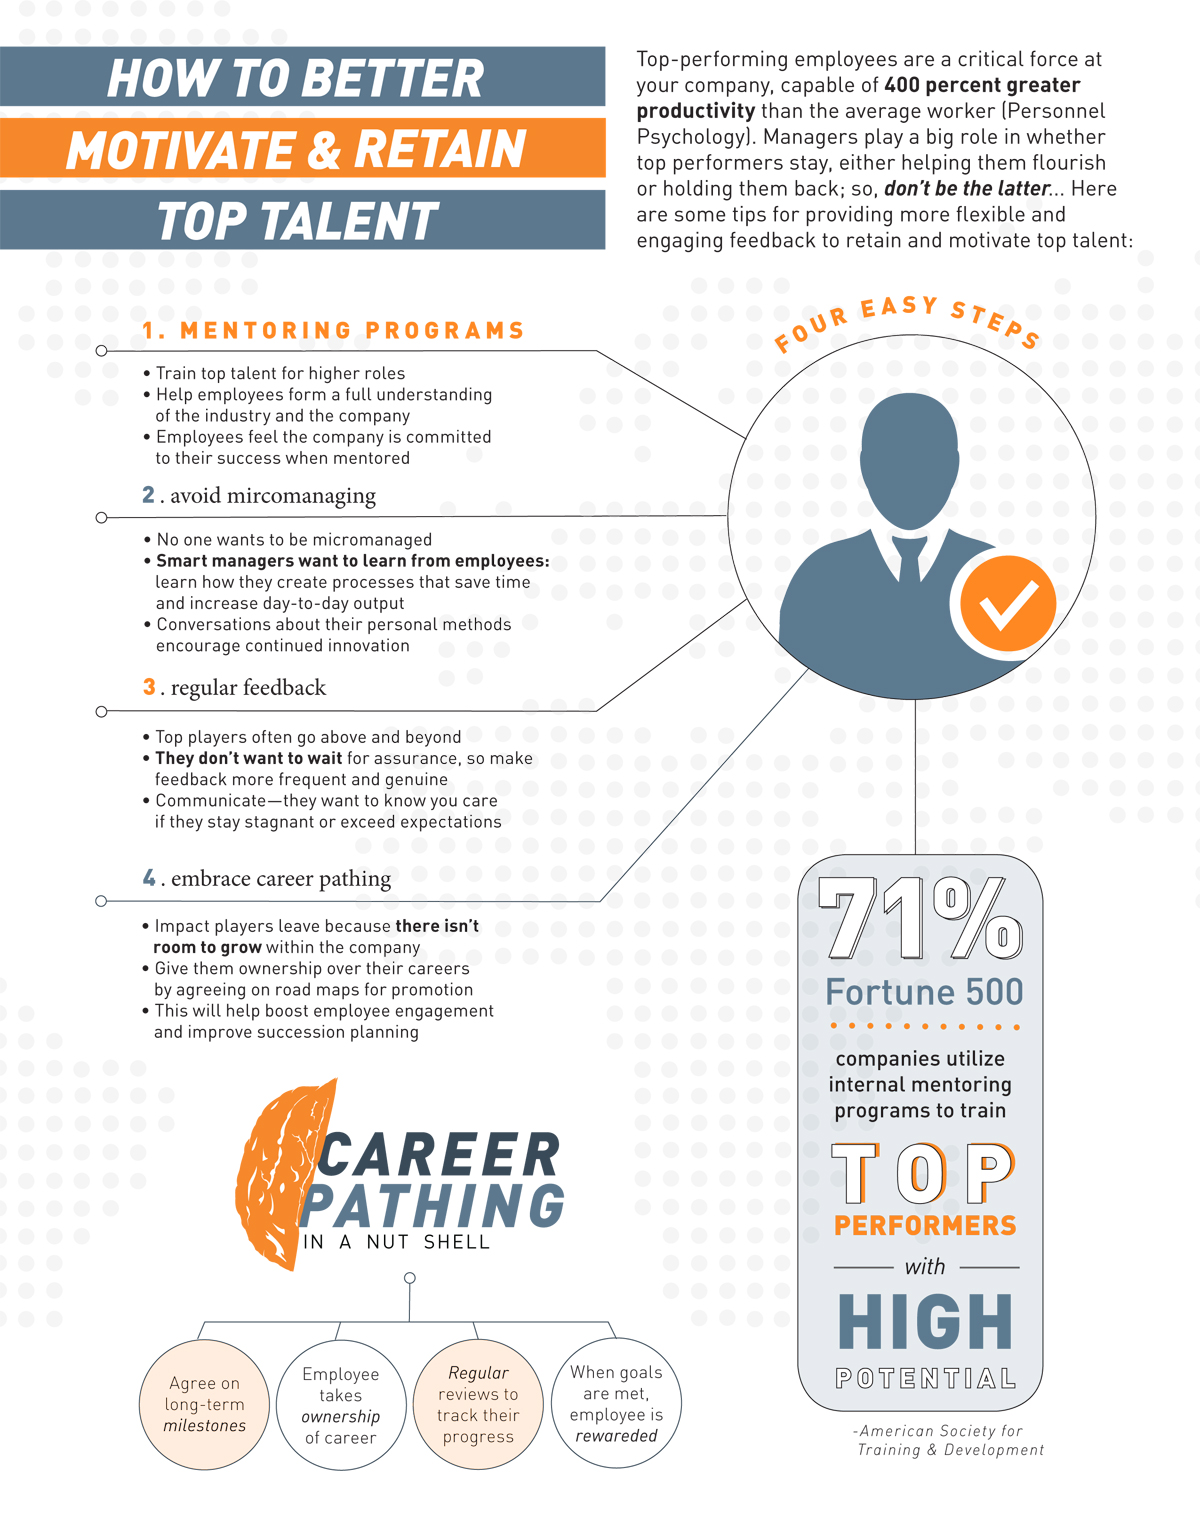 Steps for attracting and retaining top talent in your middle market company